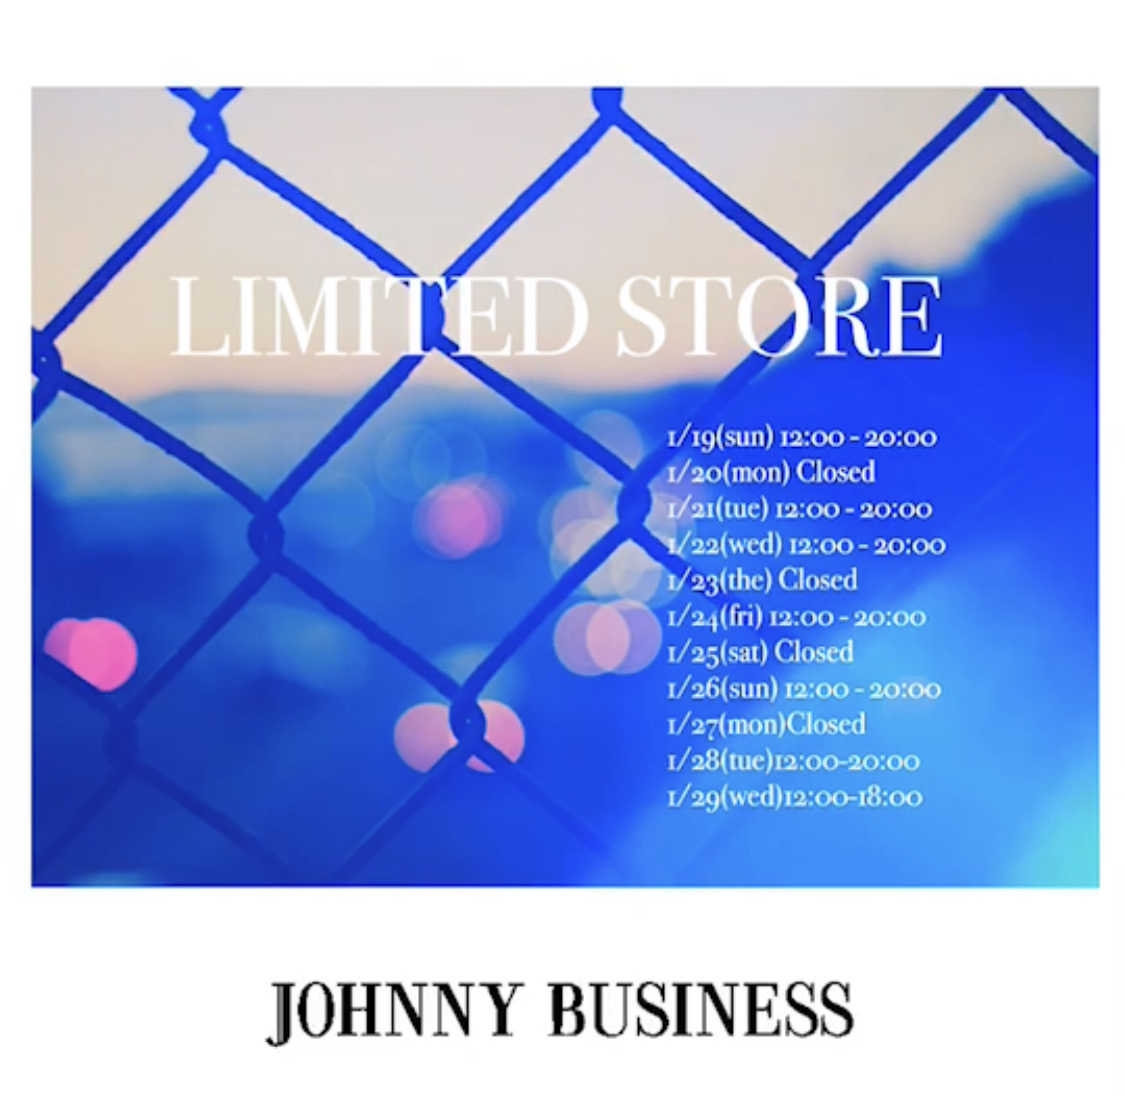 LIMITED STORE